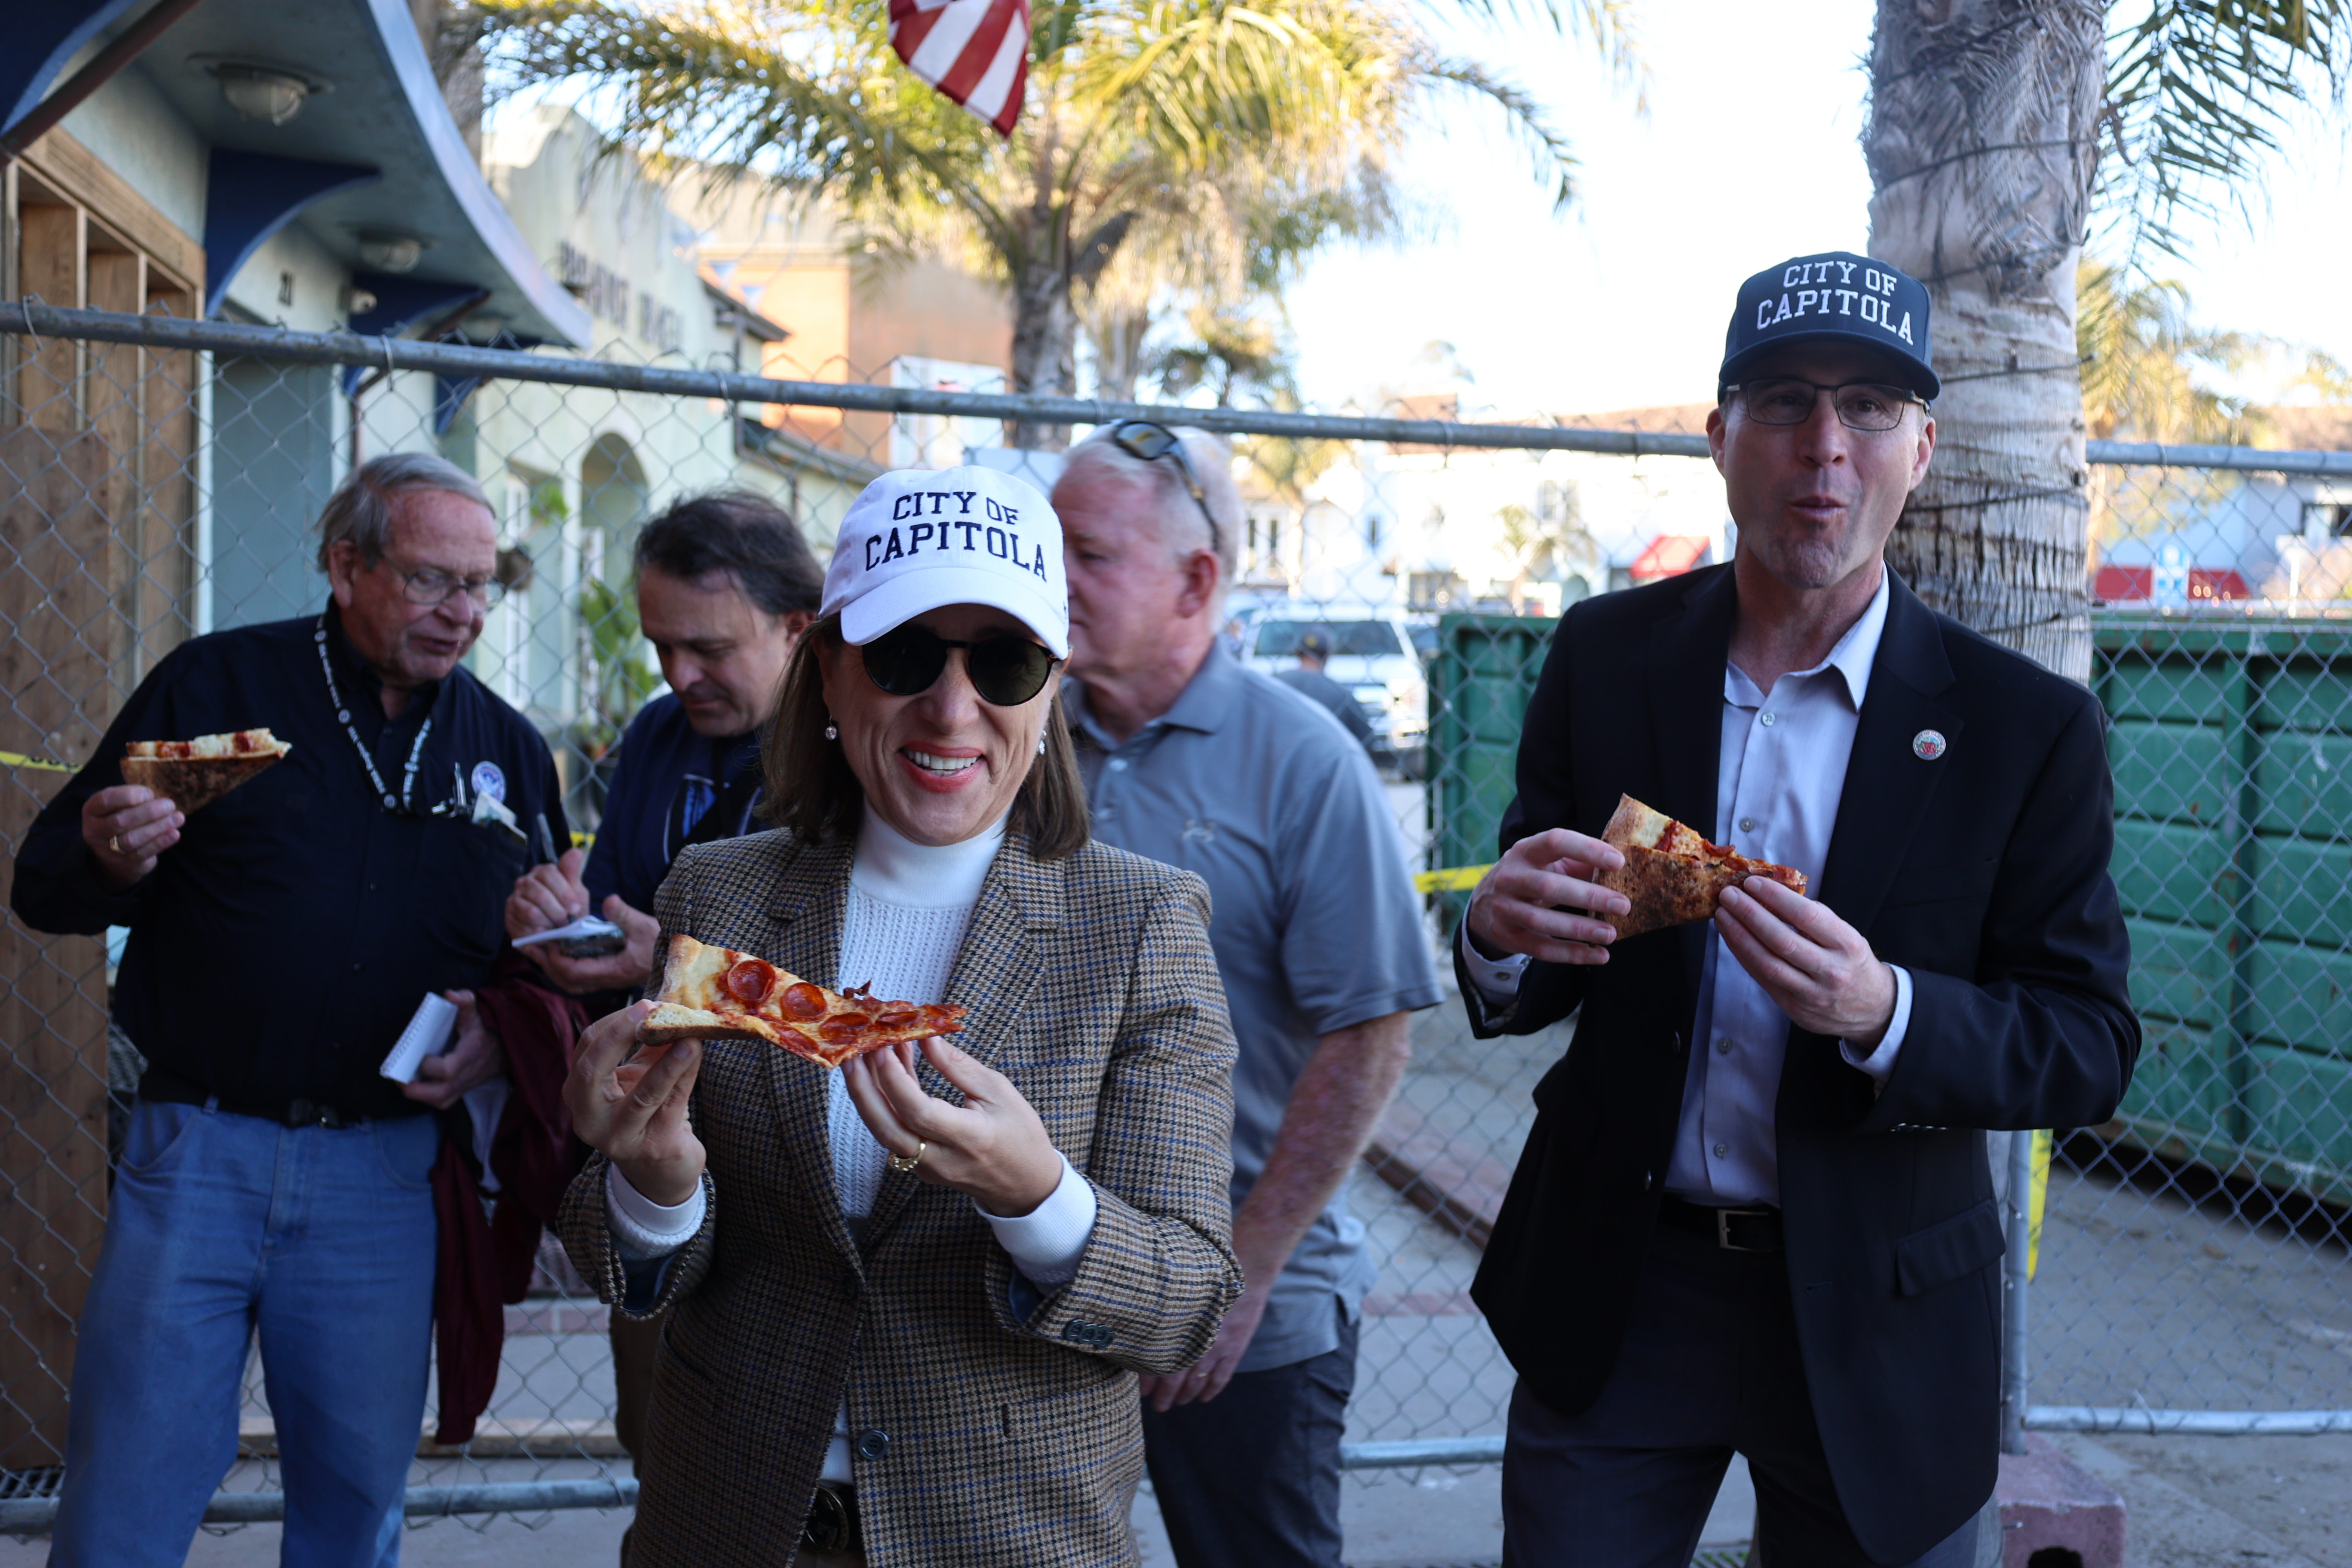 Image of Lt. Governor Kounalakis with Capitola City Manager eating at Pizza My Heart